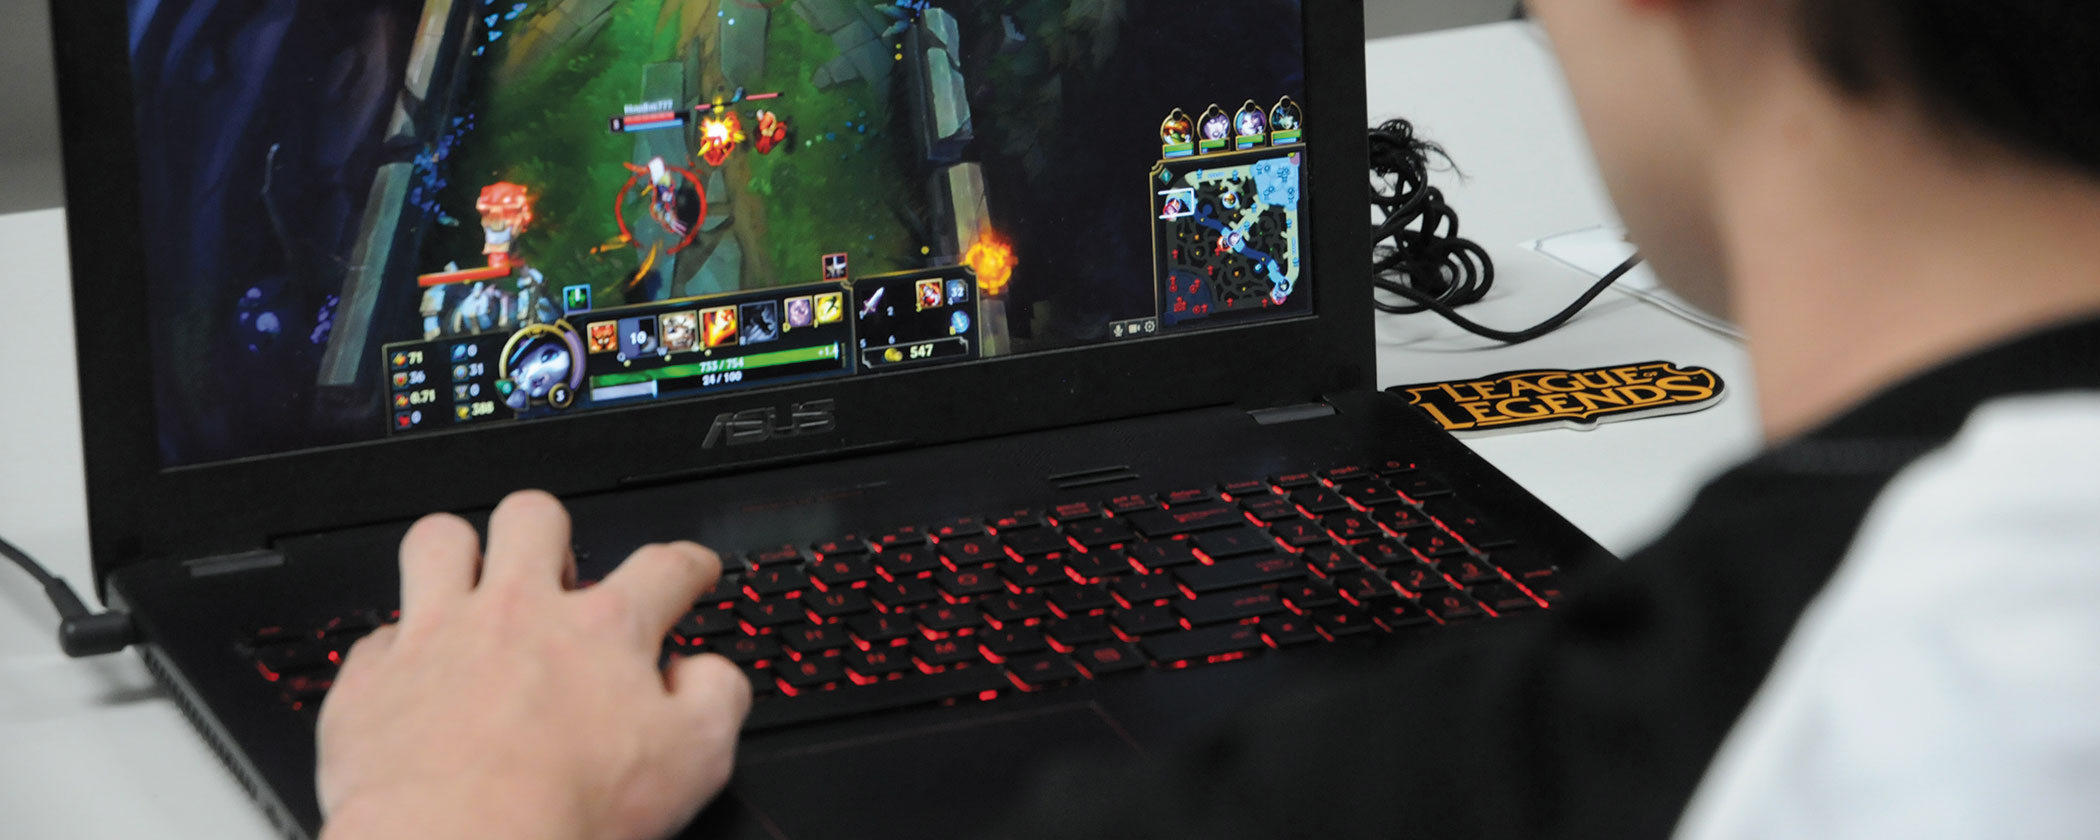 Student playing League of Legends on his laptop